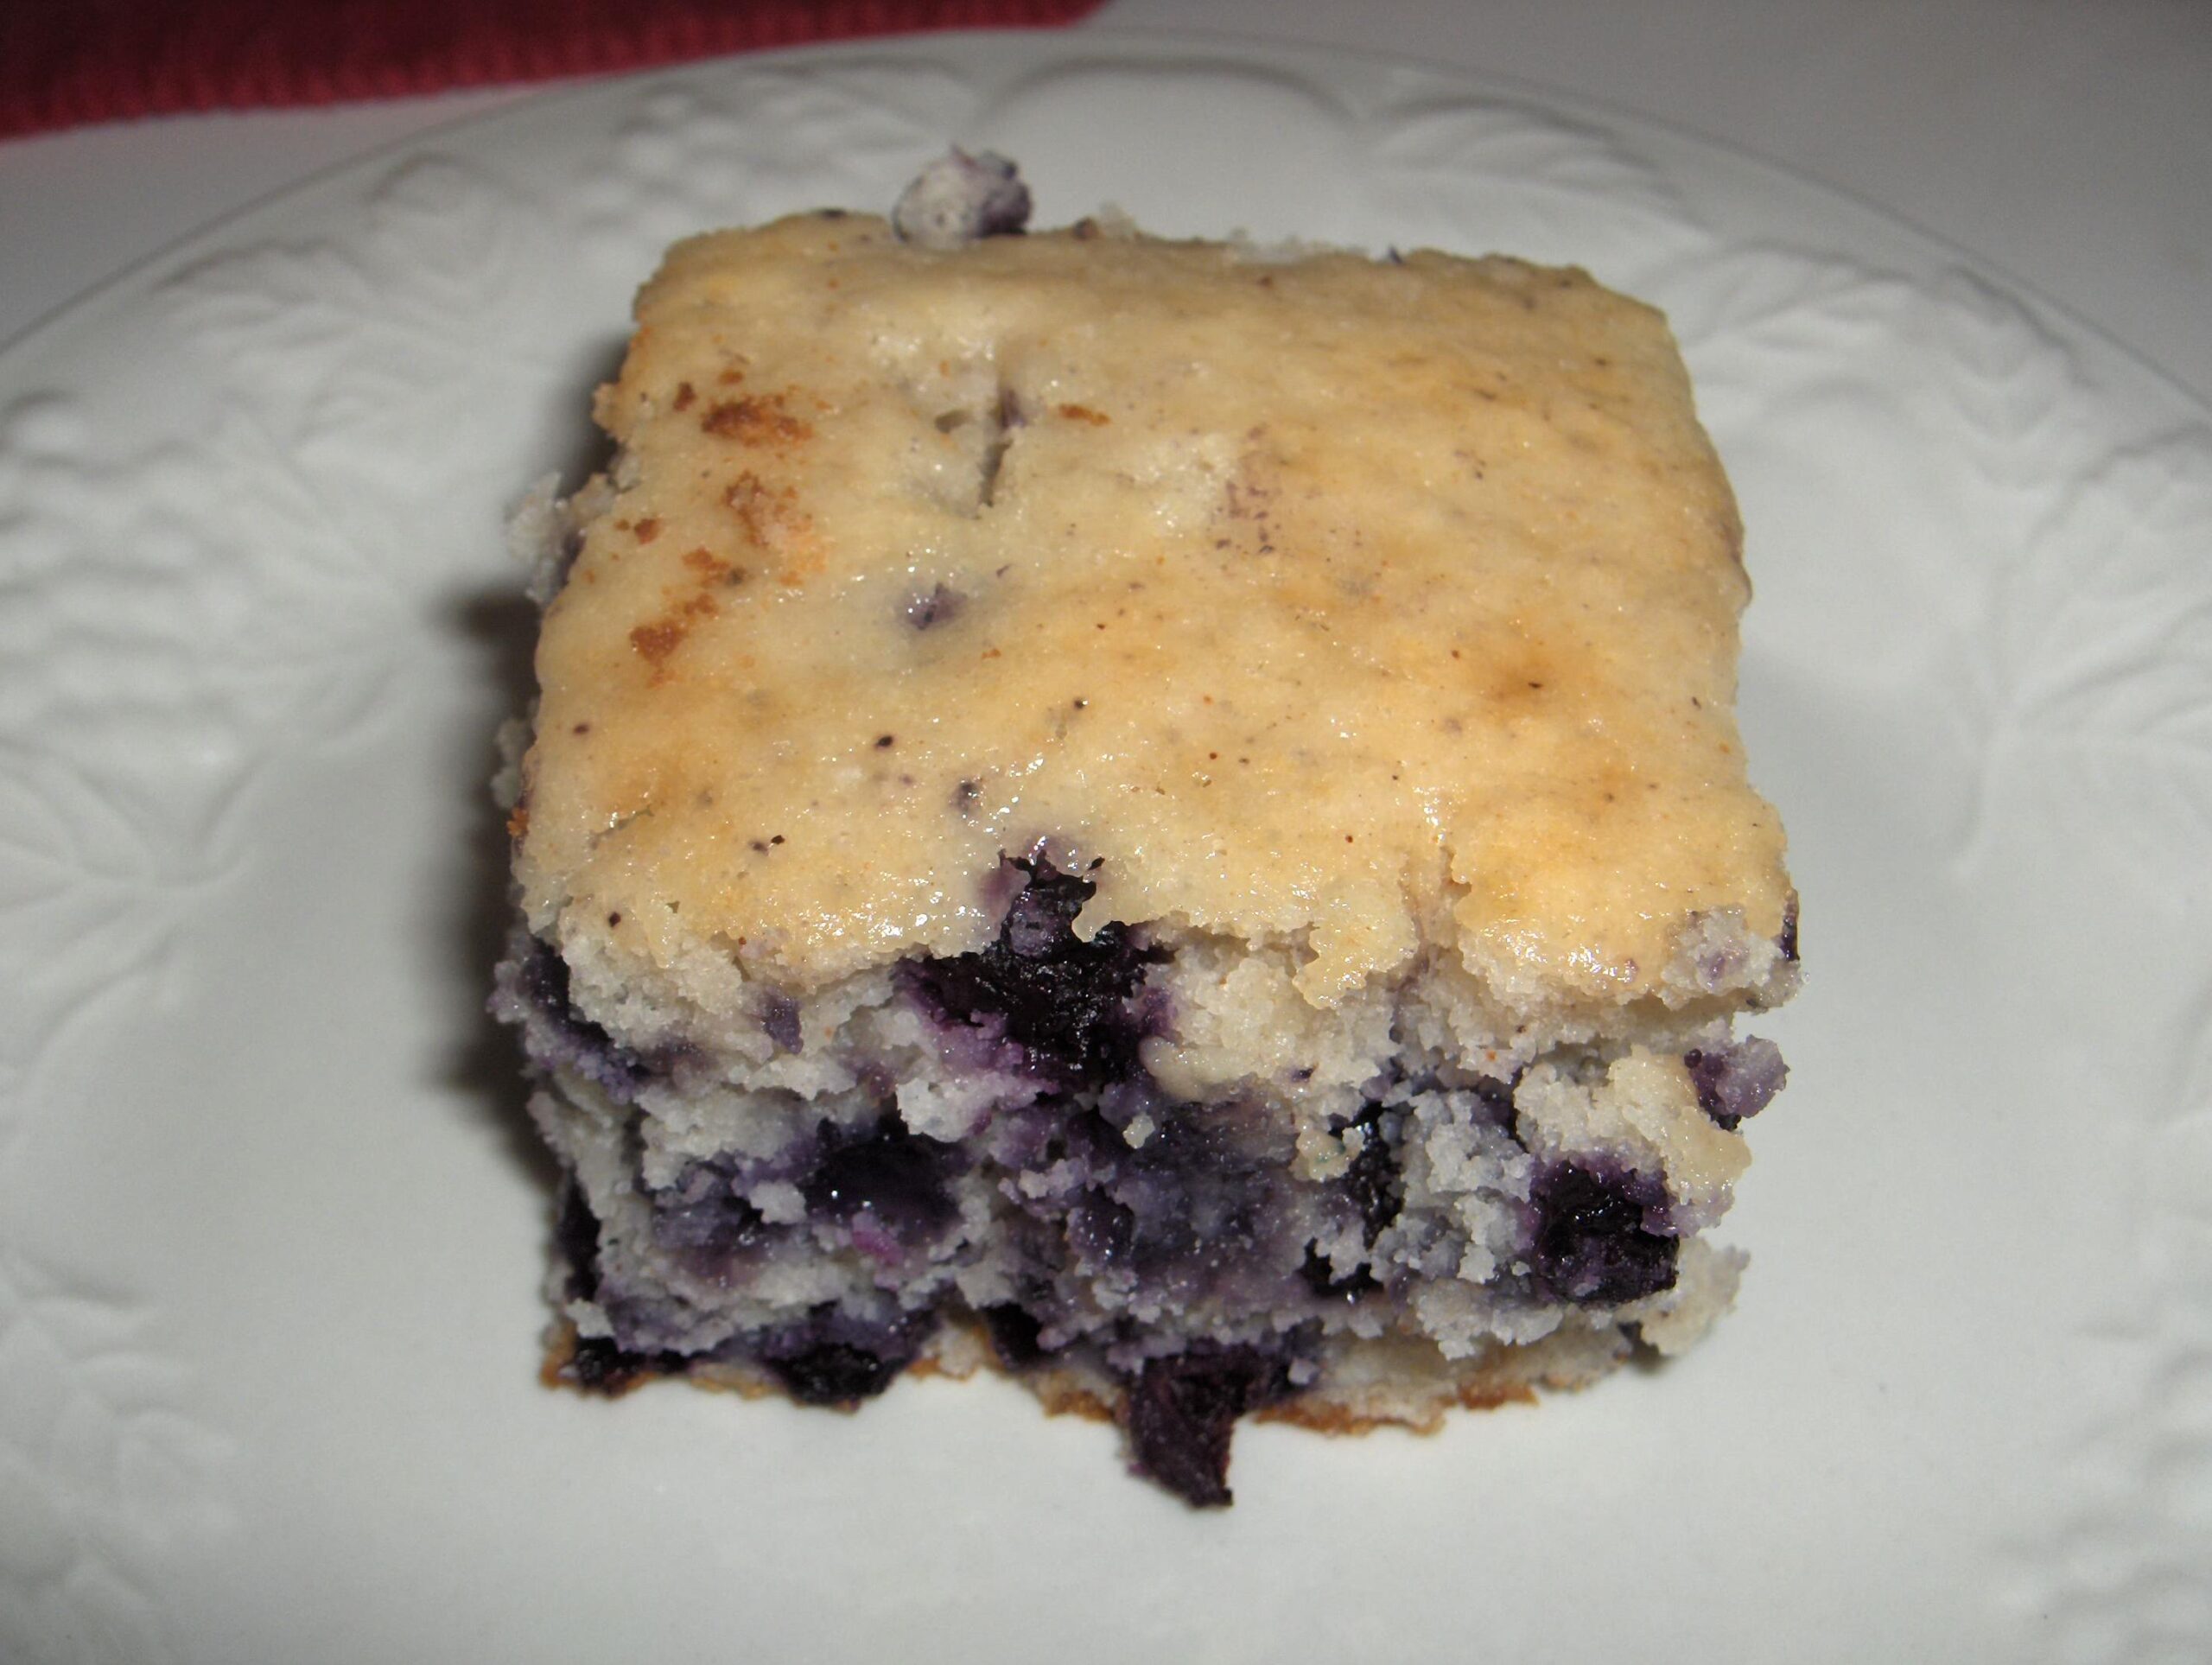  Your coffee break just got sweeter with this blueberry-sour cream delight.